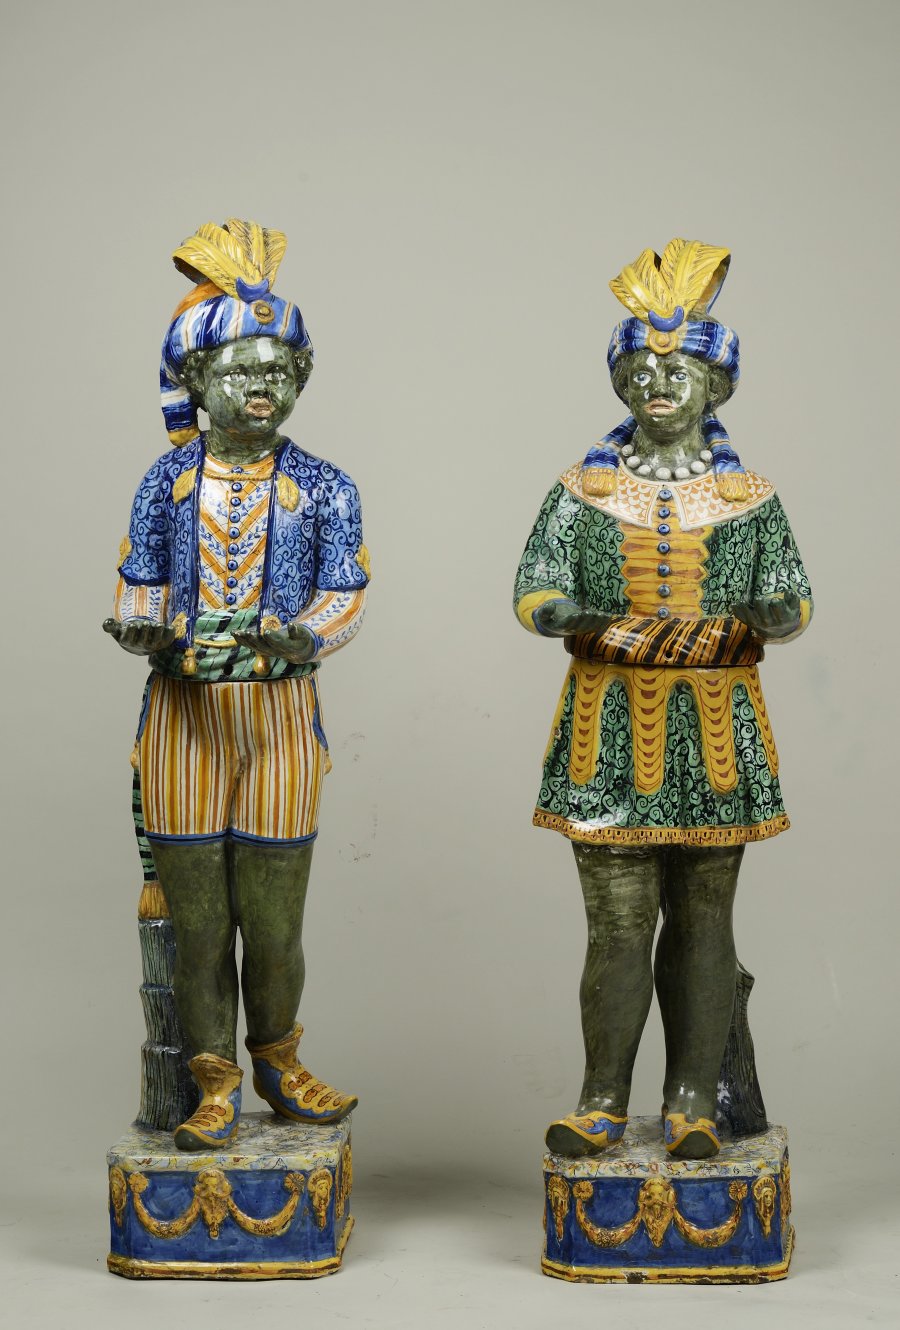 A Pair of Moor Statues